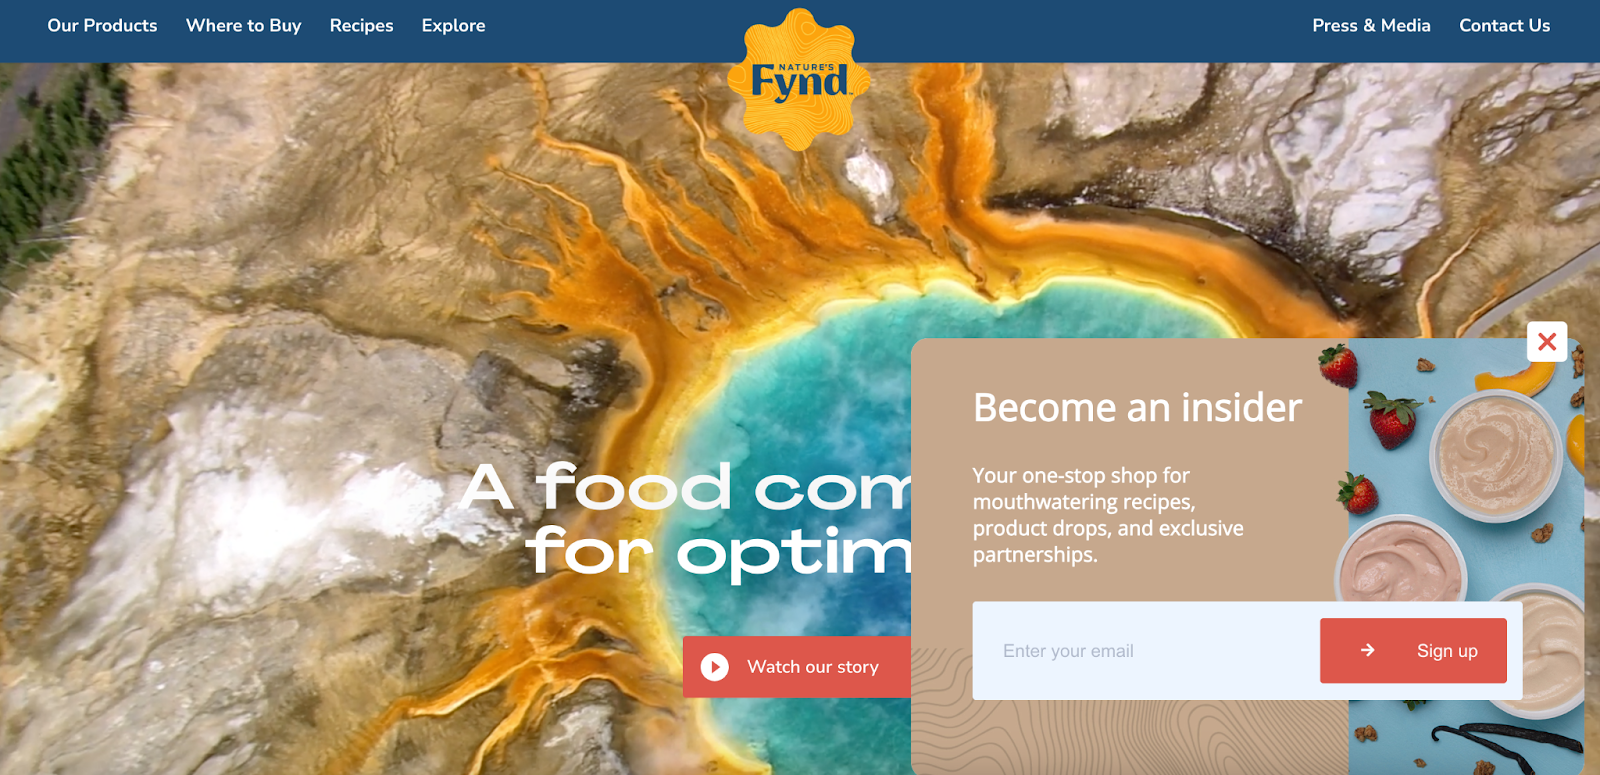 A screenshot of the Nature’s Fynd homepage featuring a pop-up form